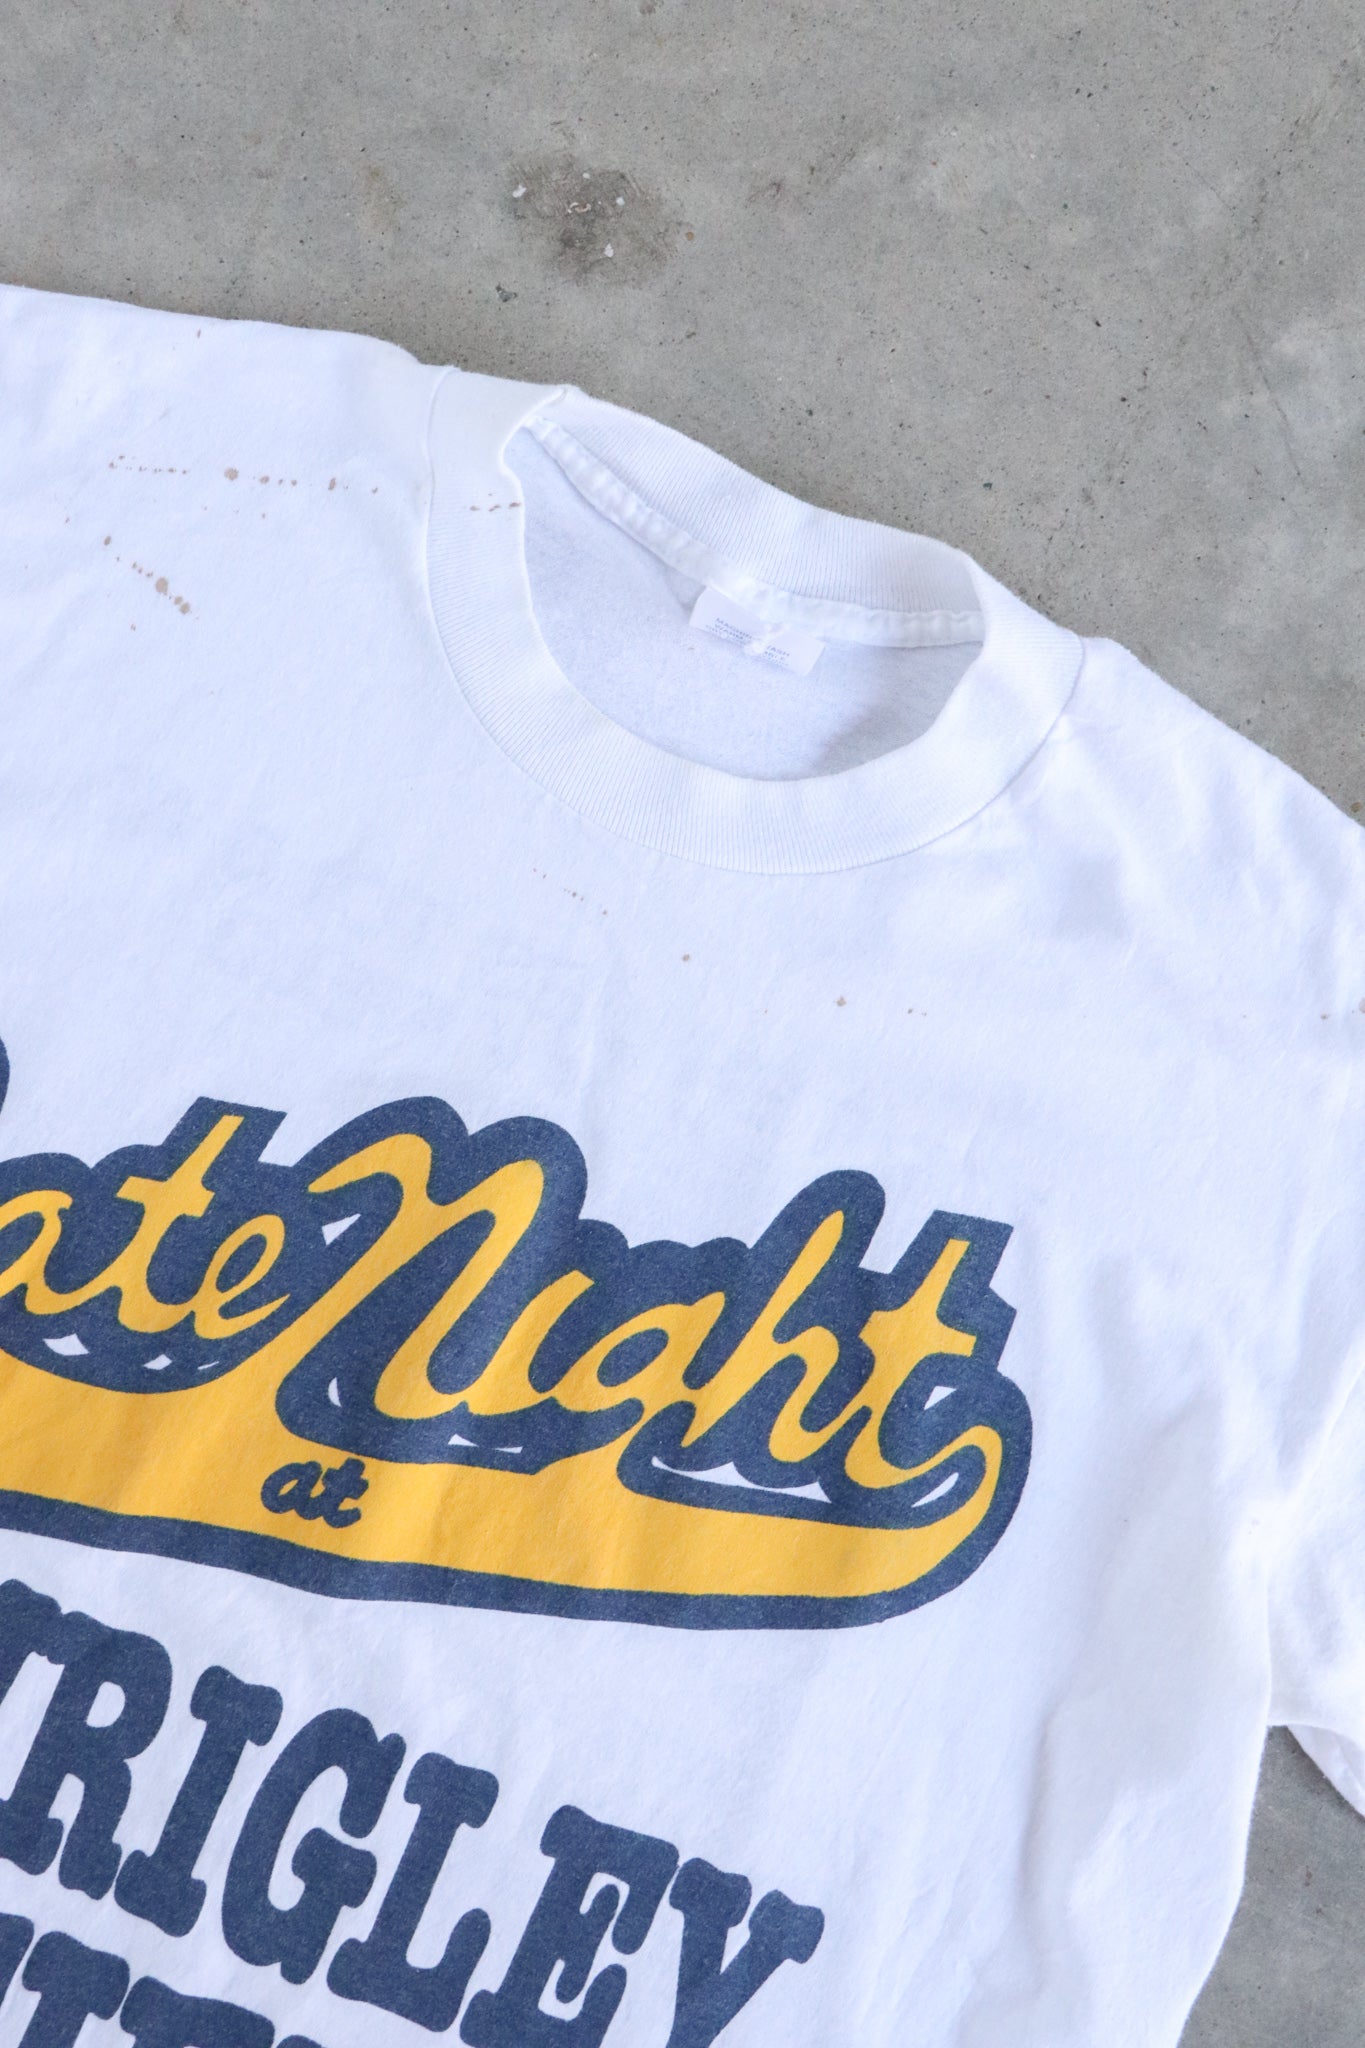 Vintage Late Night at Wrigley Field Tee Large